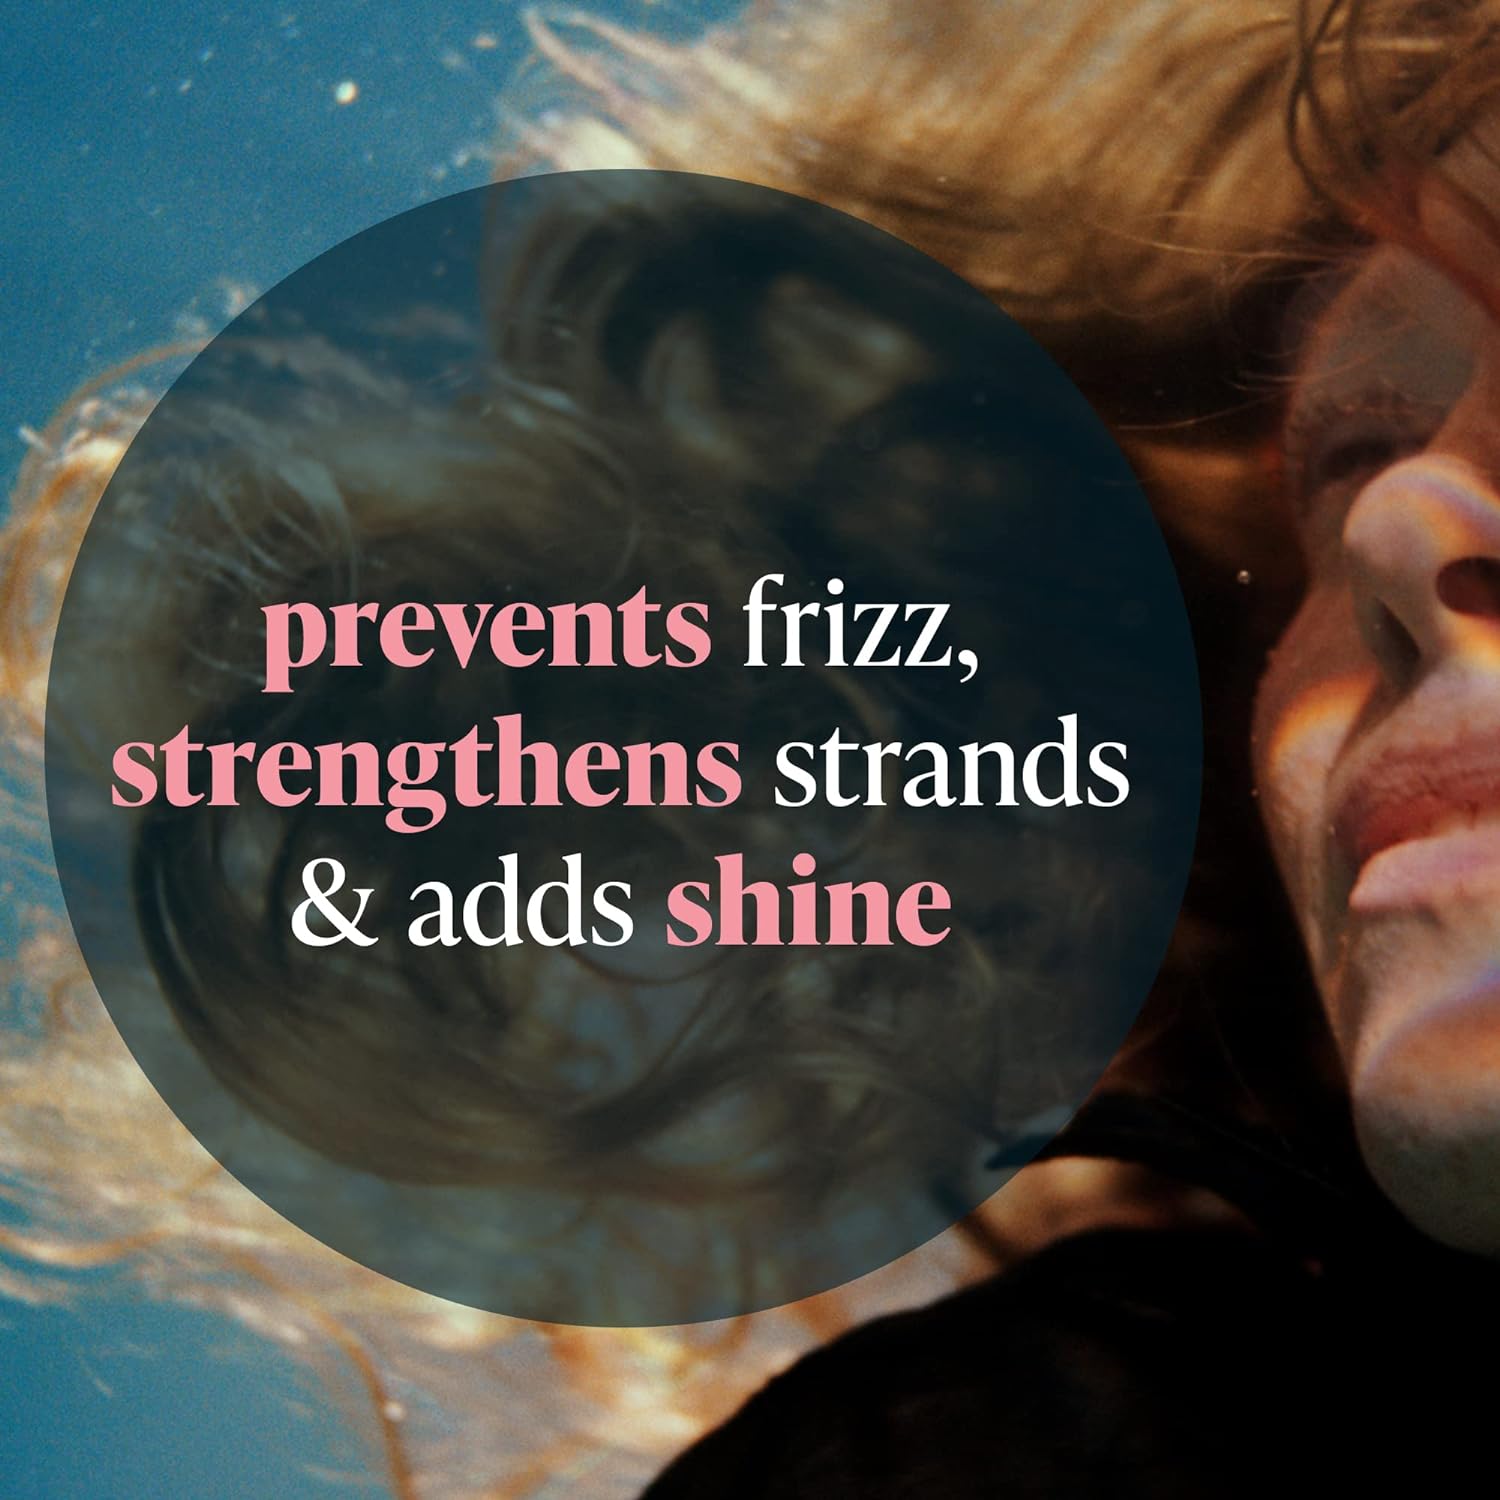 prevent frizz, strengthens strands and adds shine